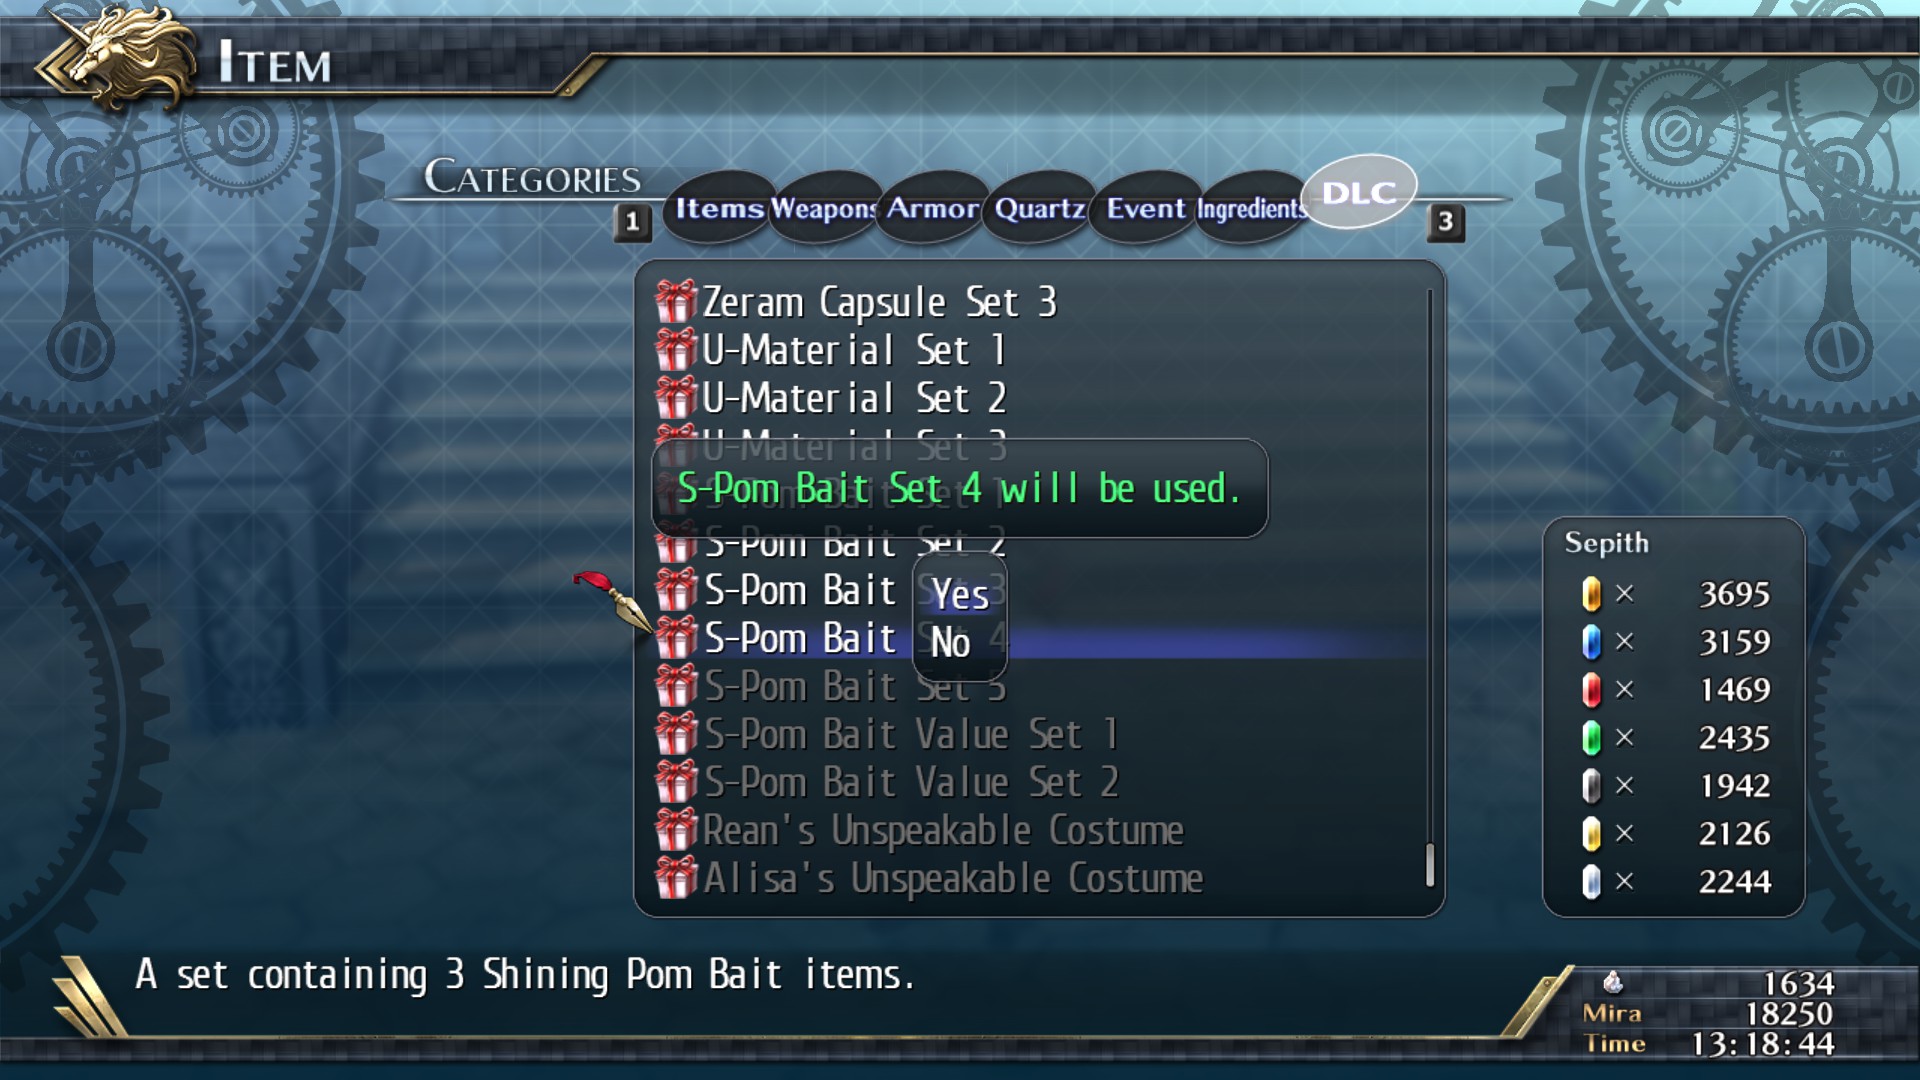 The Legend of Heroes: Trails of Cold Steel II - Shining Pom Bait Set 4 Featured Screenshot #1